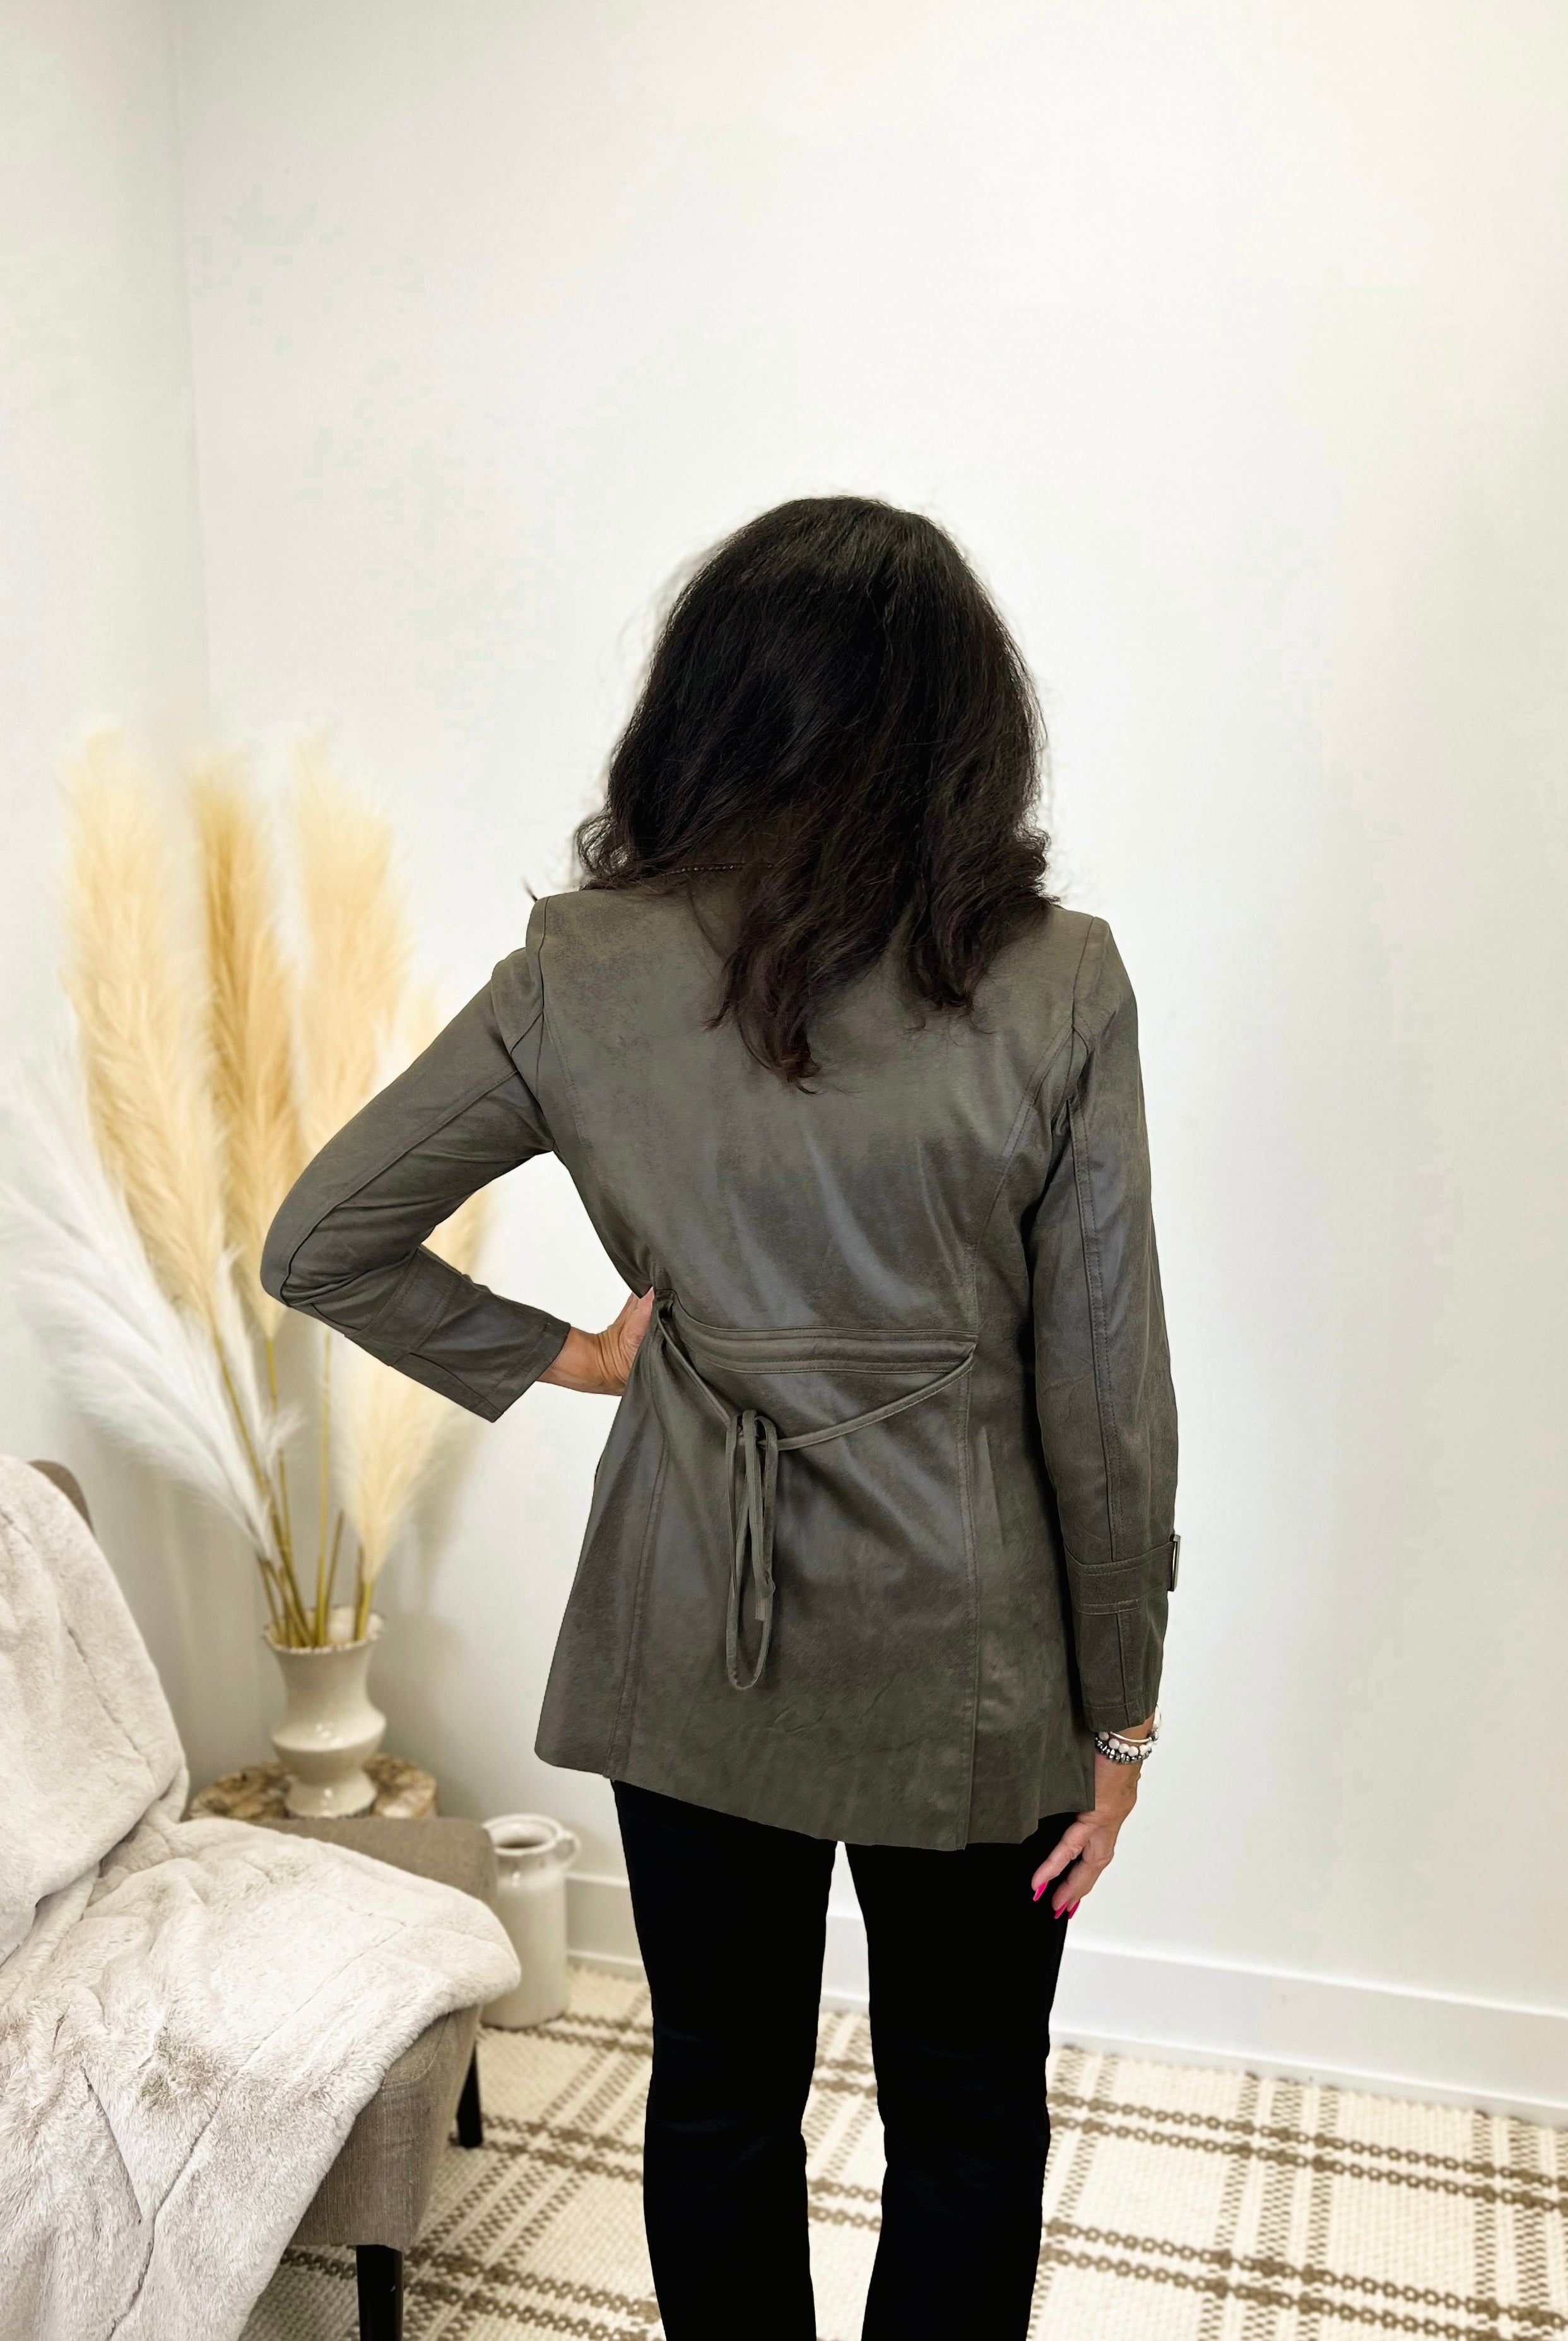 Mainstream Boutique Stillwater Egdy Faux Leather Jacket